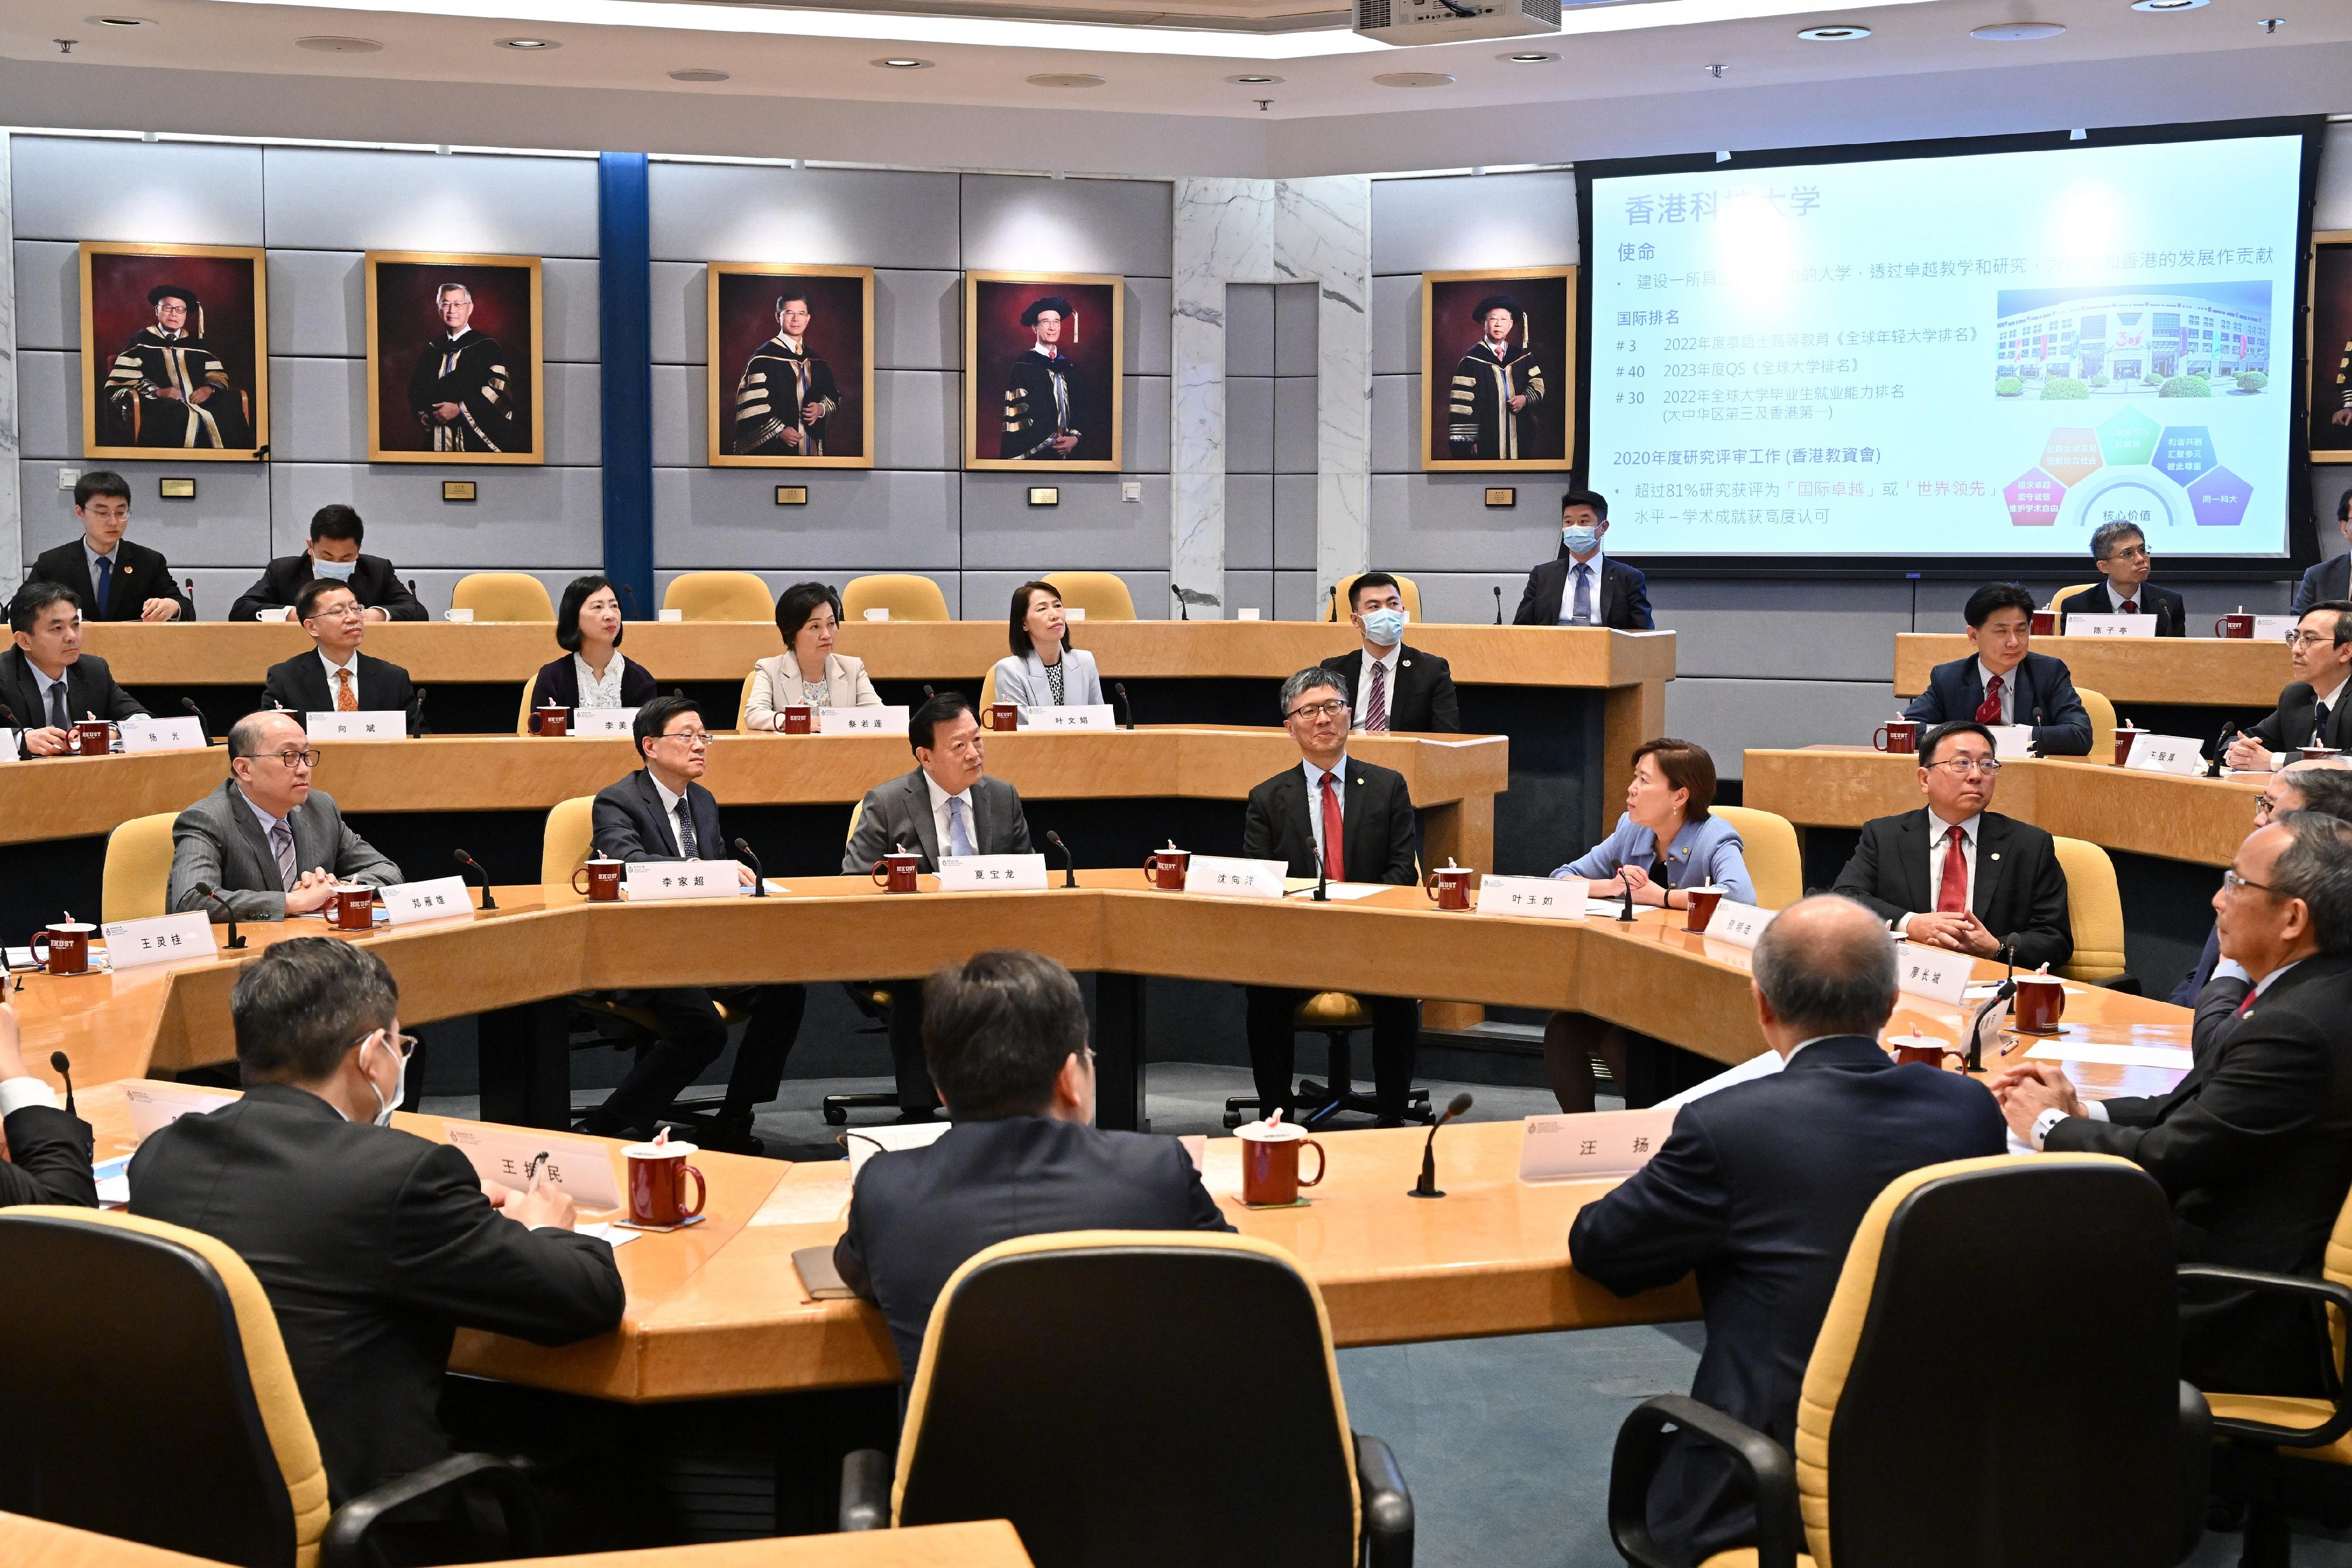 The Vice Chairman of the 13th Chinese People's Political Consultative Conference and Director of the Hong Kong and Macao Affairs Office of the State Council, Mr Xia Baolong, continued his visit in Hong Kong for a fifth day on April 17. Photo shows Mr Xia (front row, third left), accompanied by the Chief Executive, Mr John Lee (front row, second left), being briefed by the Council Chairman of the Hong Kong University of Science and Technology (HKUST), Professor Harry Shum (front row, third right), and the President of the HKUST, Professor Nancy Ip (front row, second right), on the development strategy of the University.